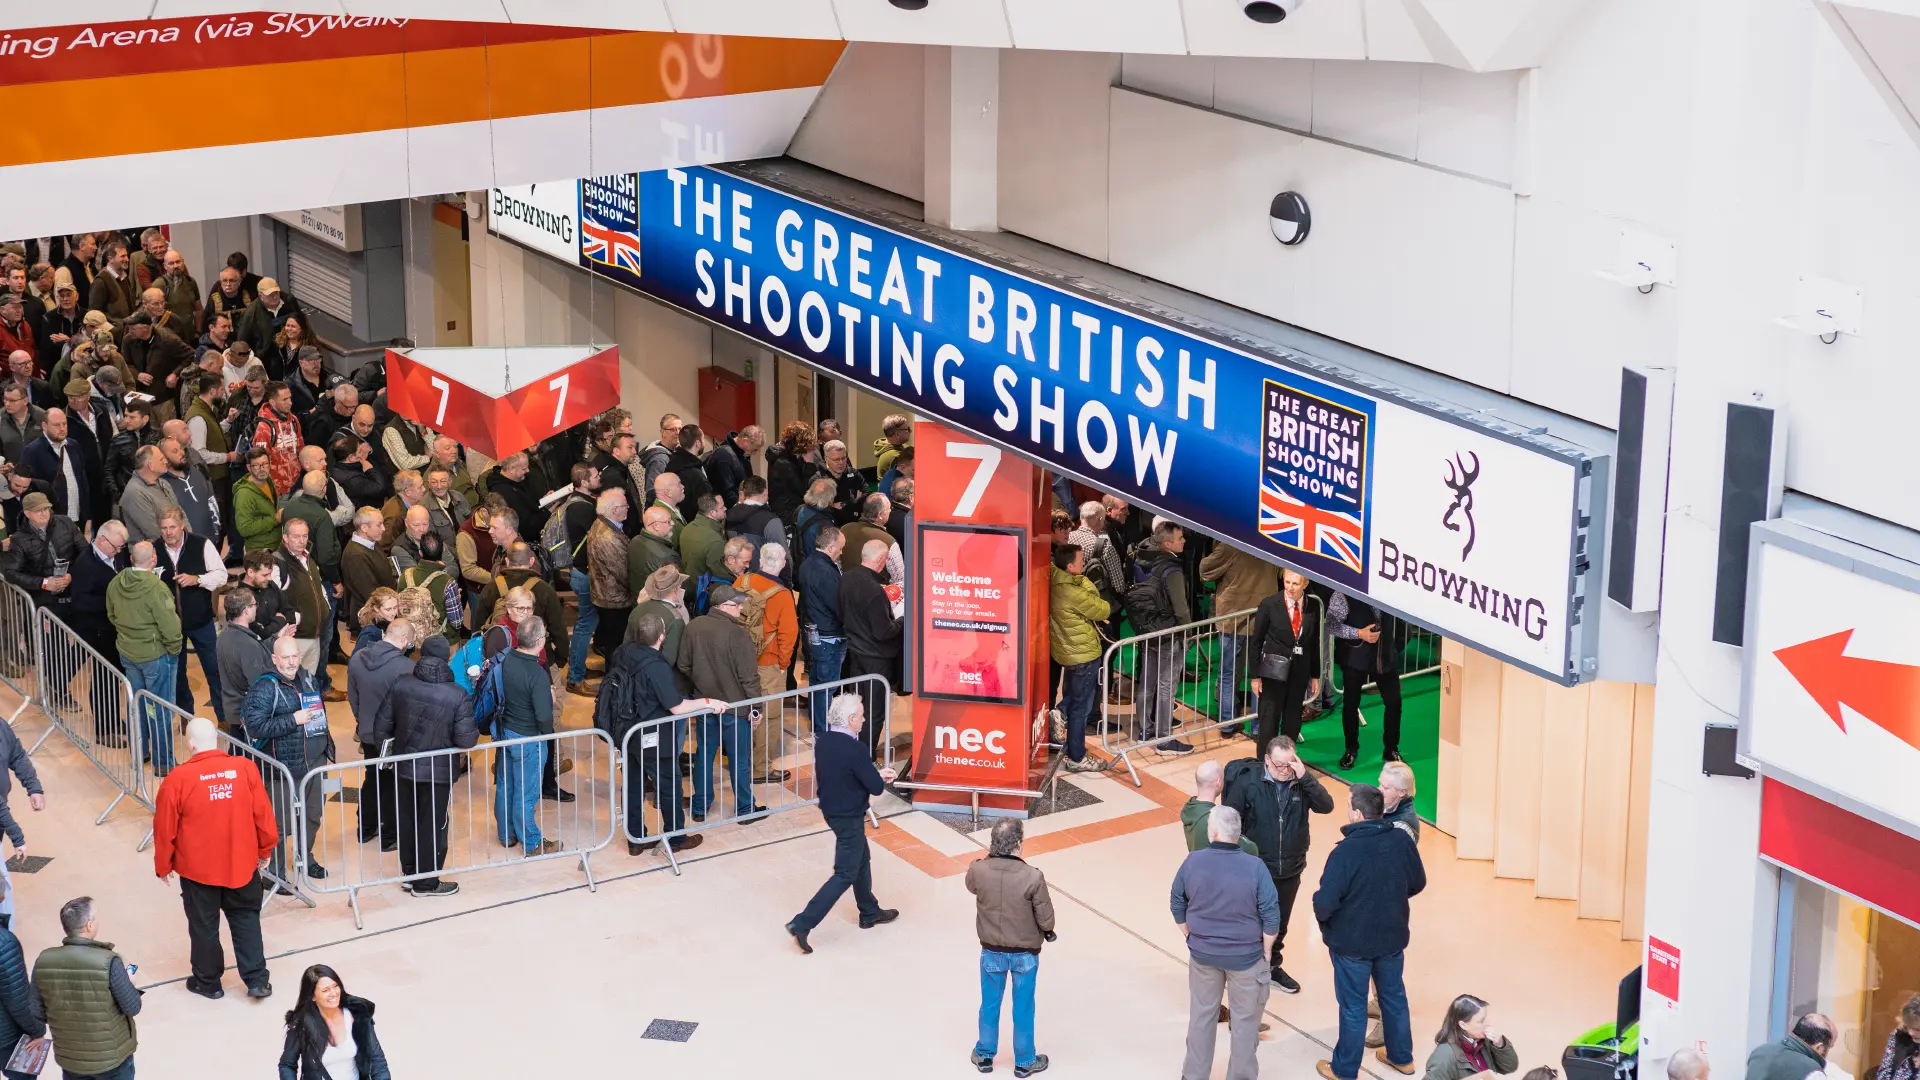 The Inspiring Journey of the British Shooting Show